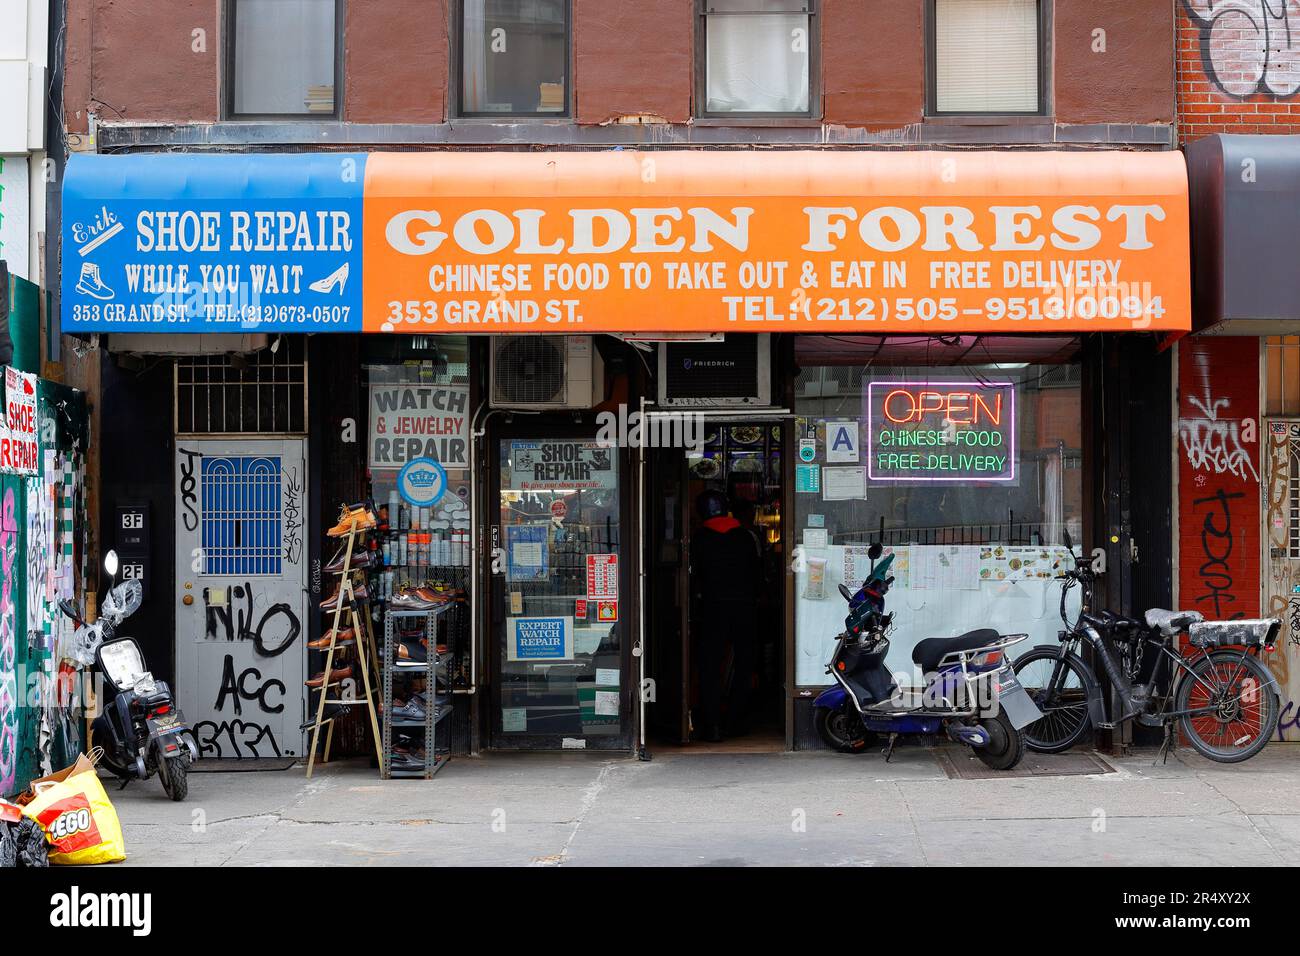 Erik Shoe Repair, Golden Forest, 353 Grand St, New York, NYC storefront photo of a shoe repair, and Chinese takeout restaurant in the Lower East Side. Stock Photo